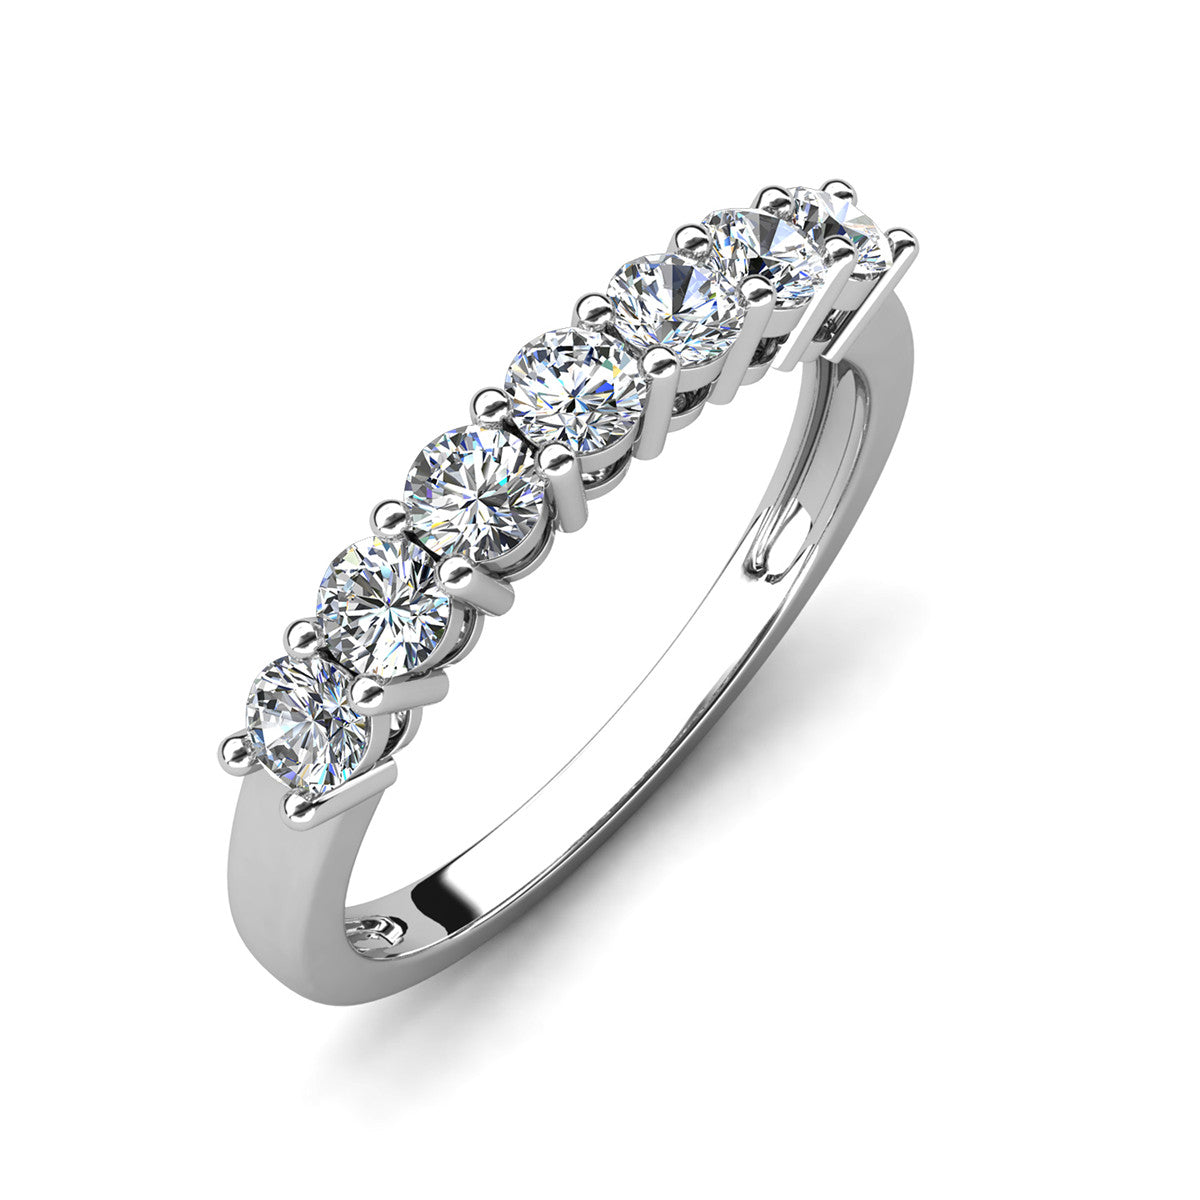 Moissanite by Cate & Chloe Josephine Sterling Silver Ring with Moissanite and 5A Cubic Zirconia Crystals